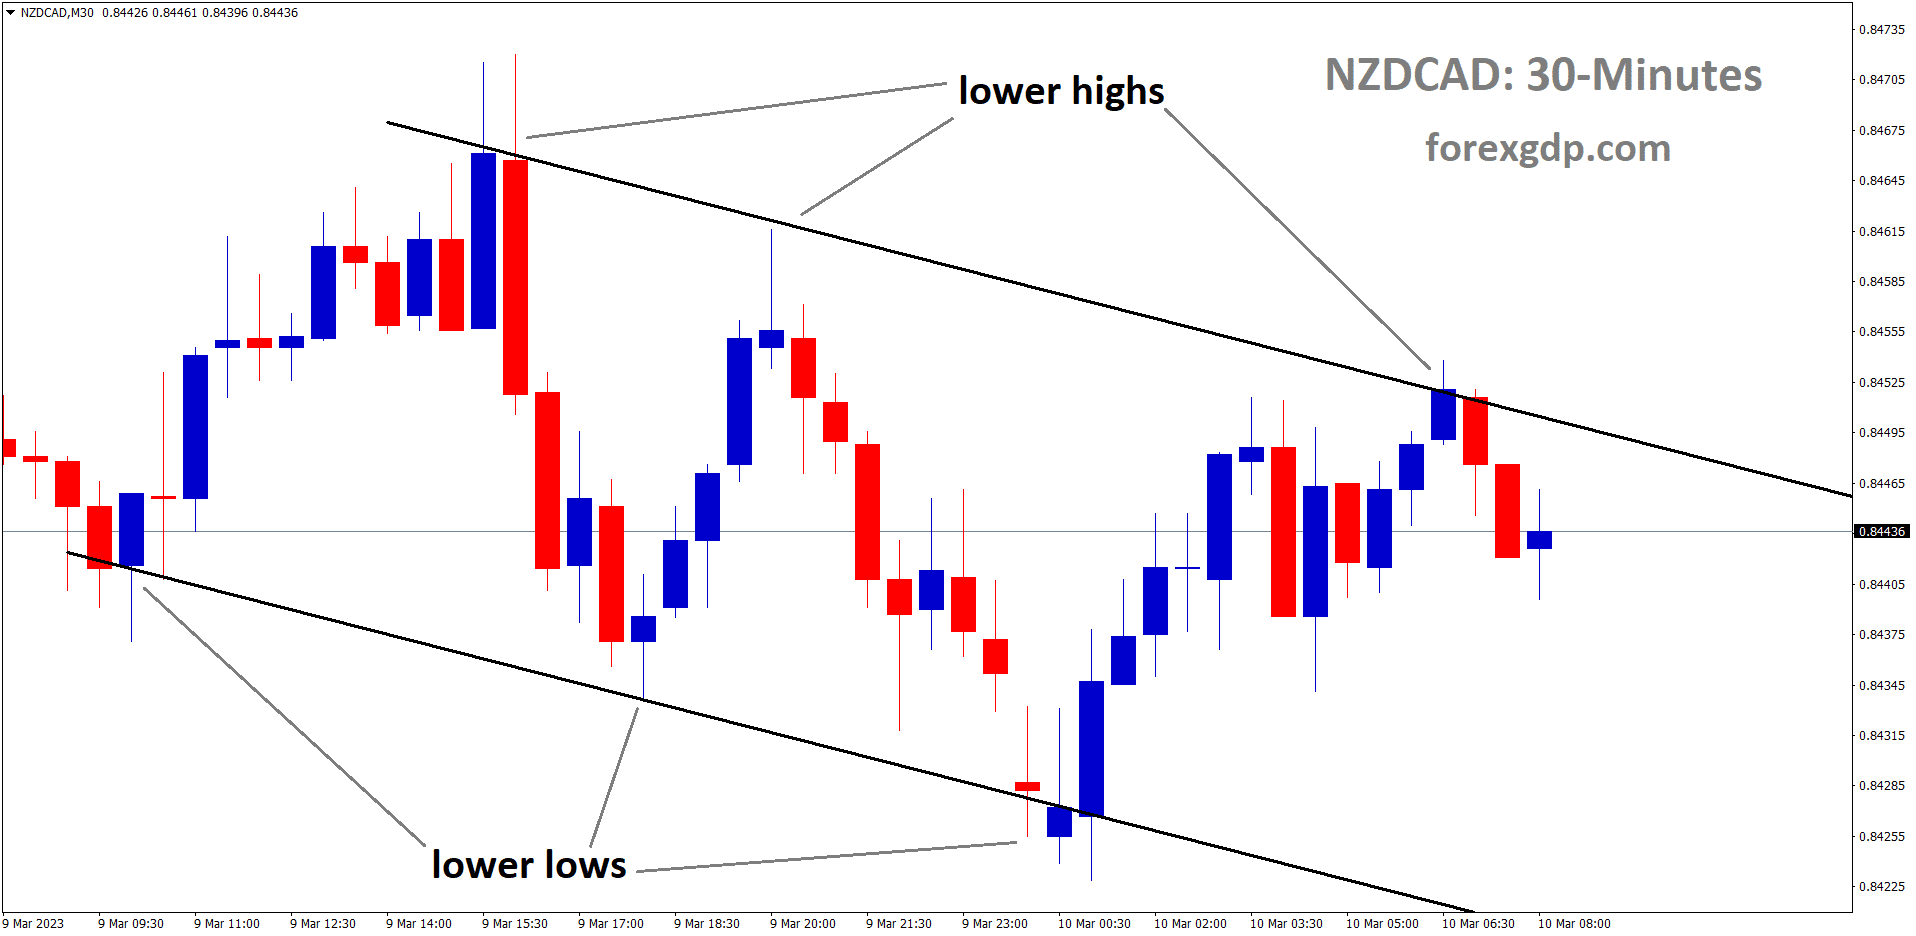 NZDCAD is moving in descending channel and the market has fallen from the lower high area of the channel.